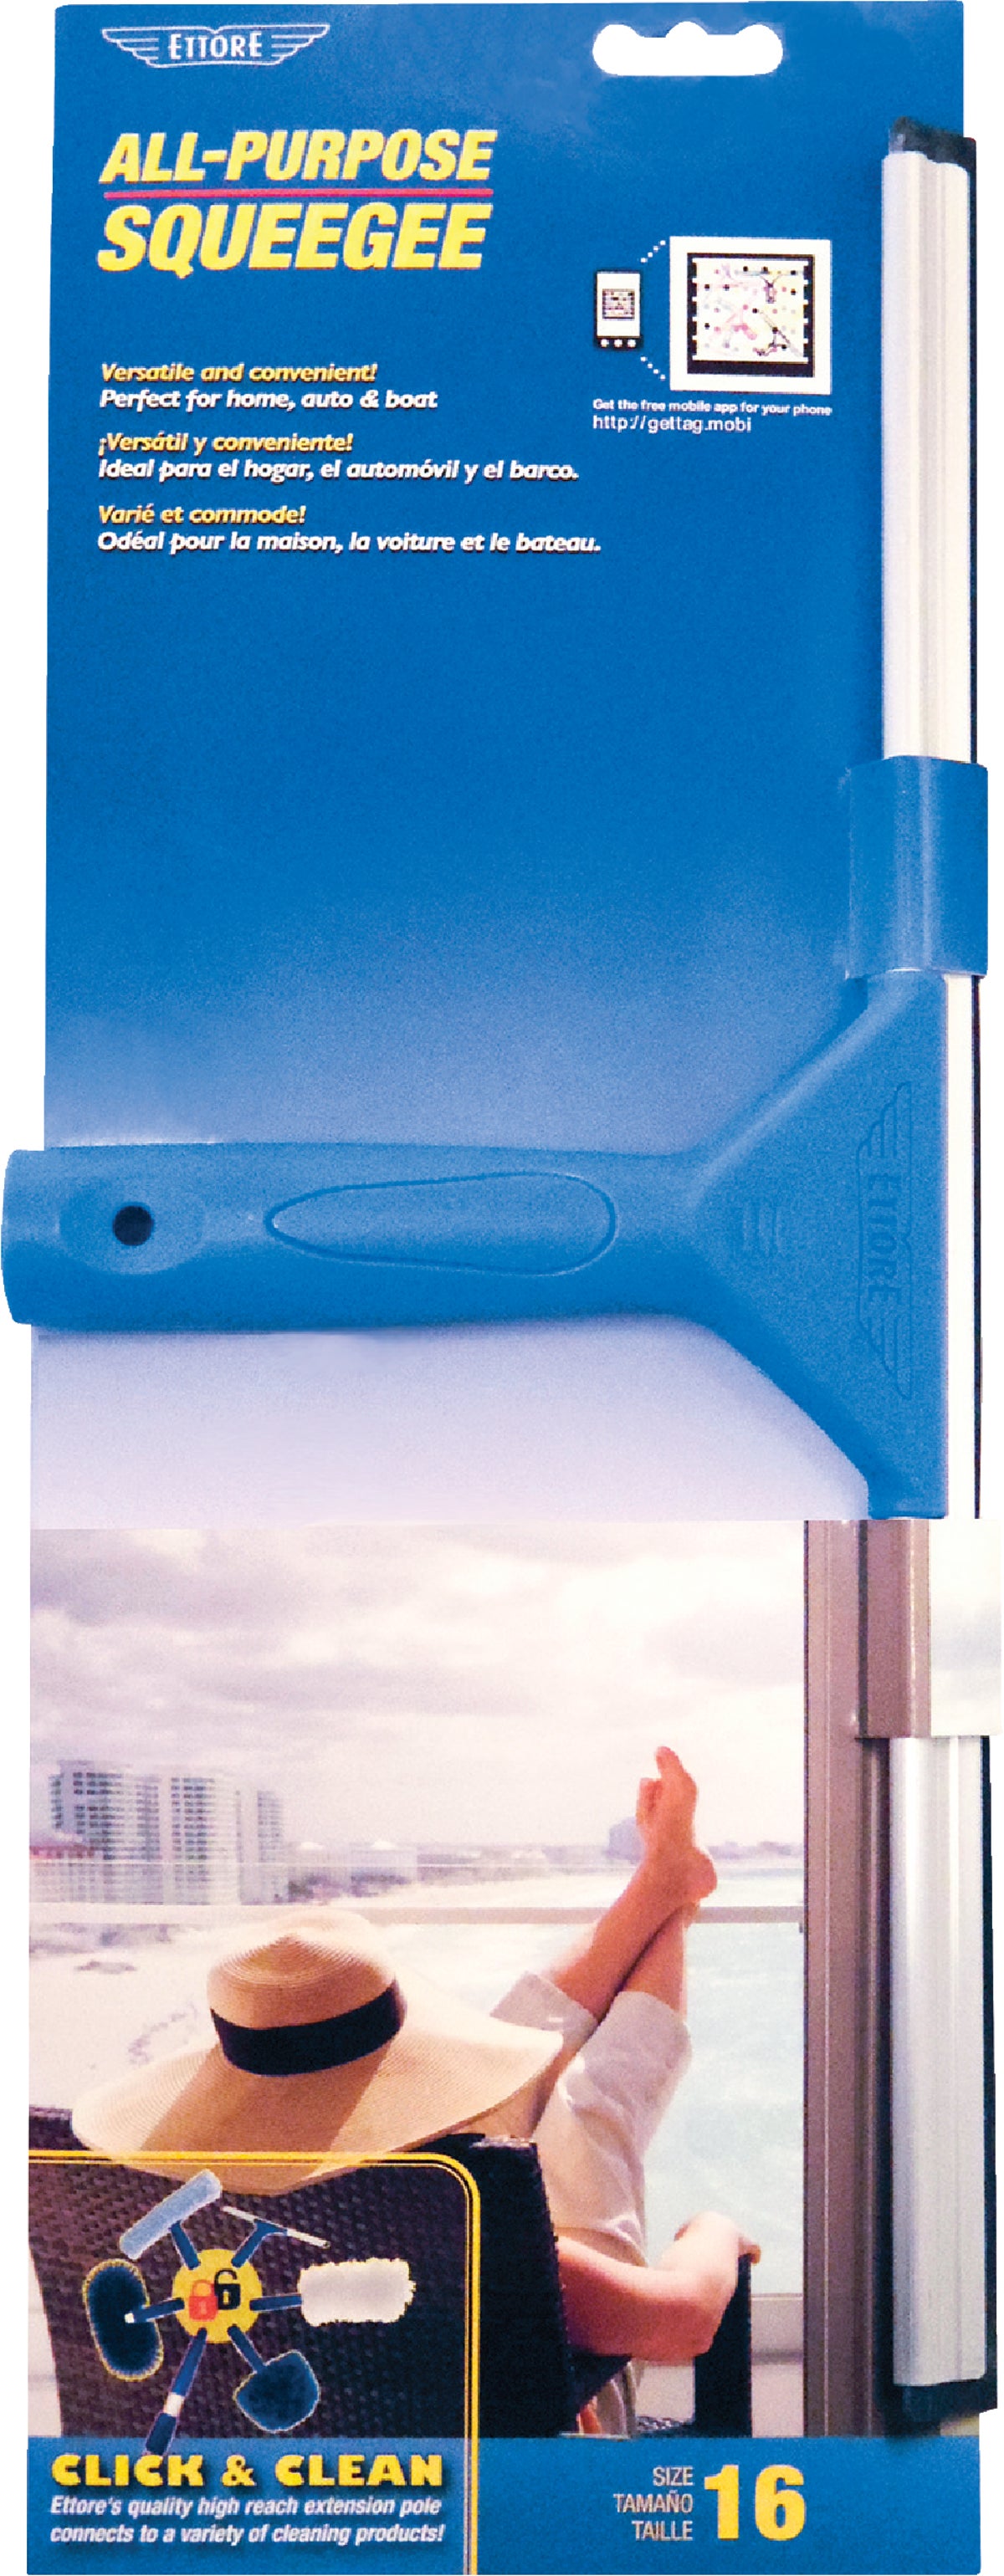 Acrylic Squeegee, 6 Inch – Ettore Products Co